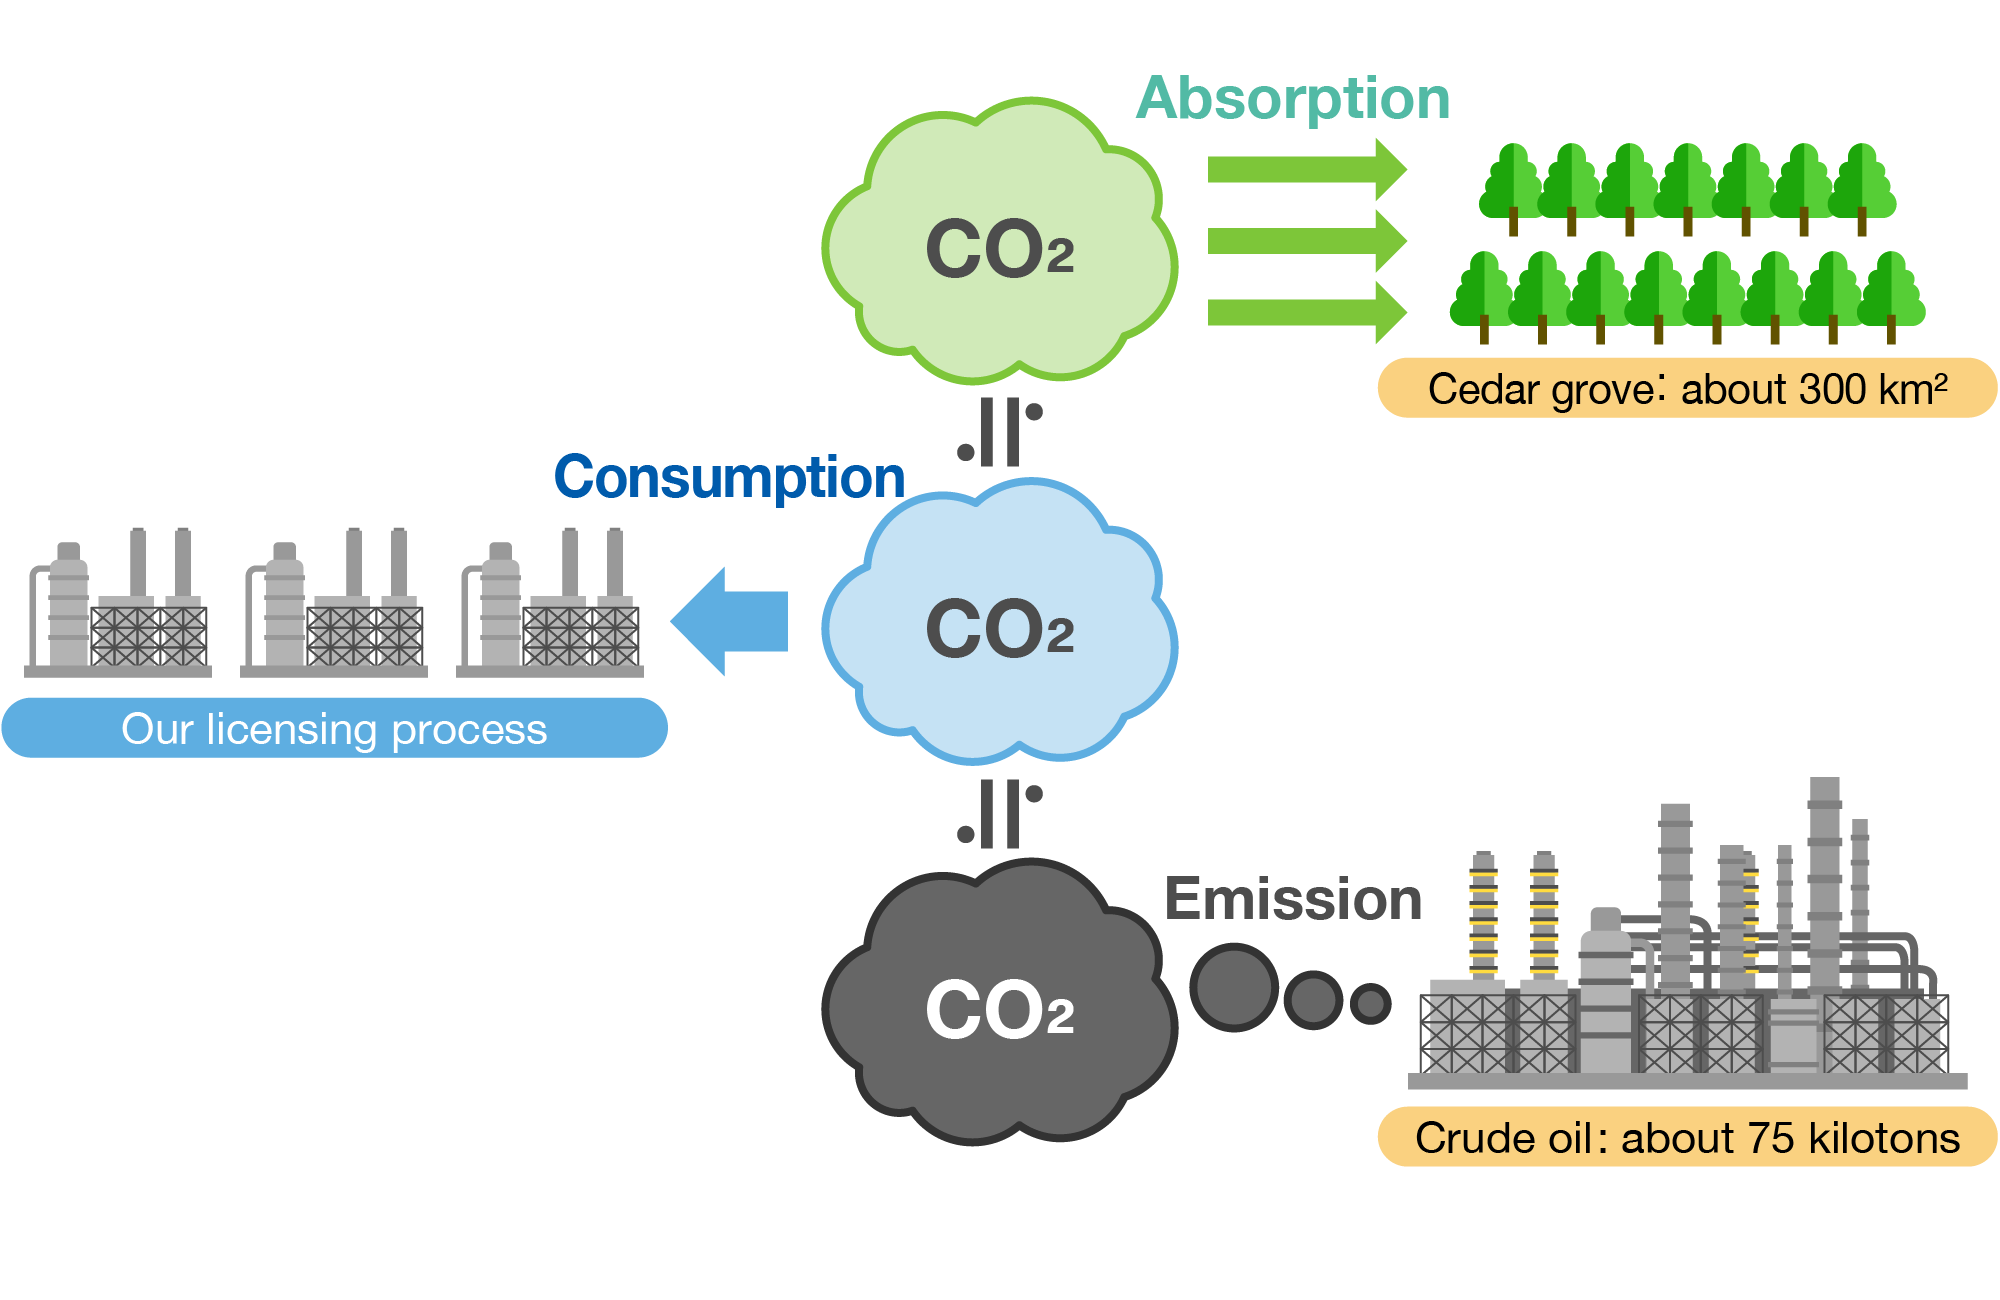 Consumption amount of CO₂ as a raw material